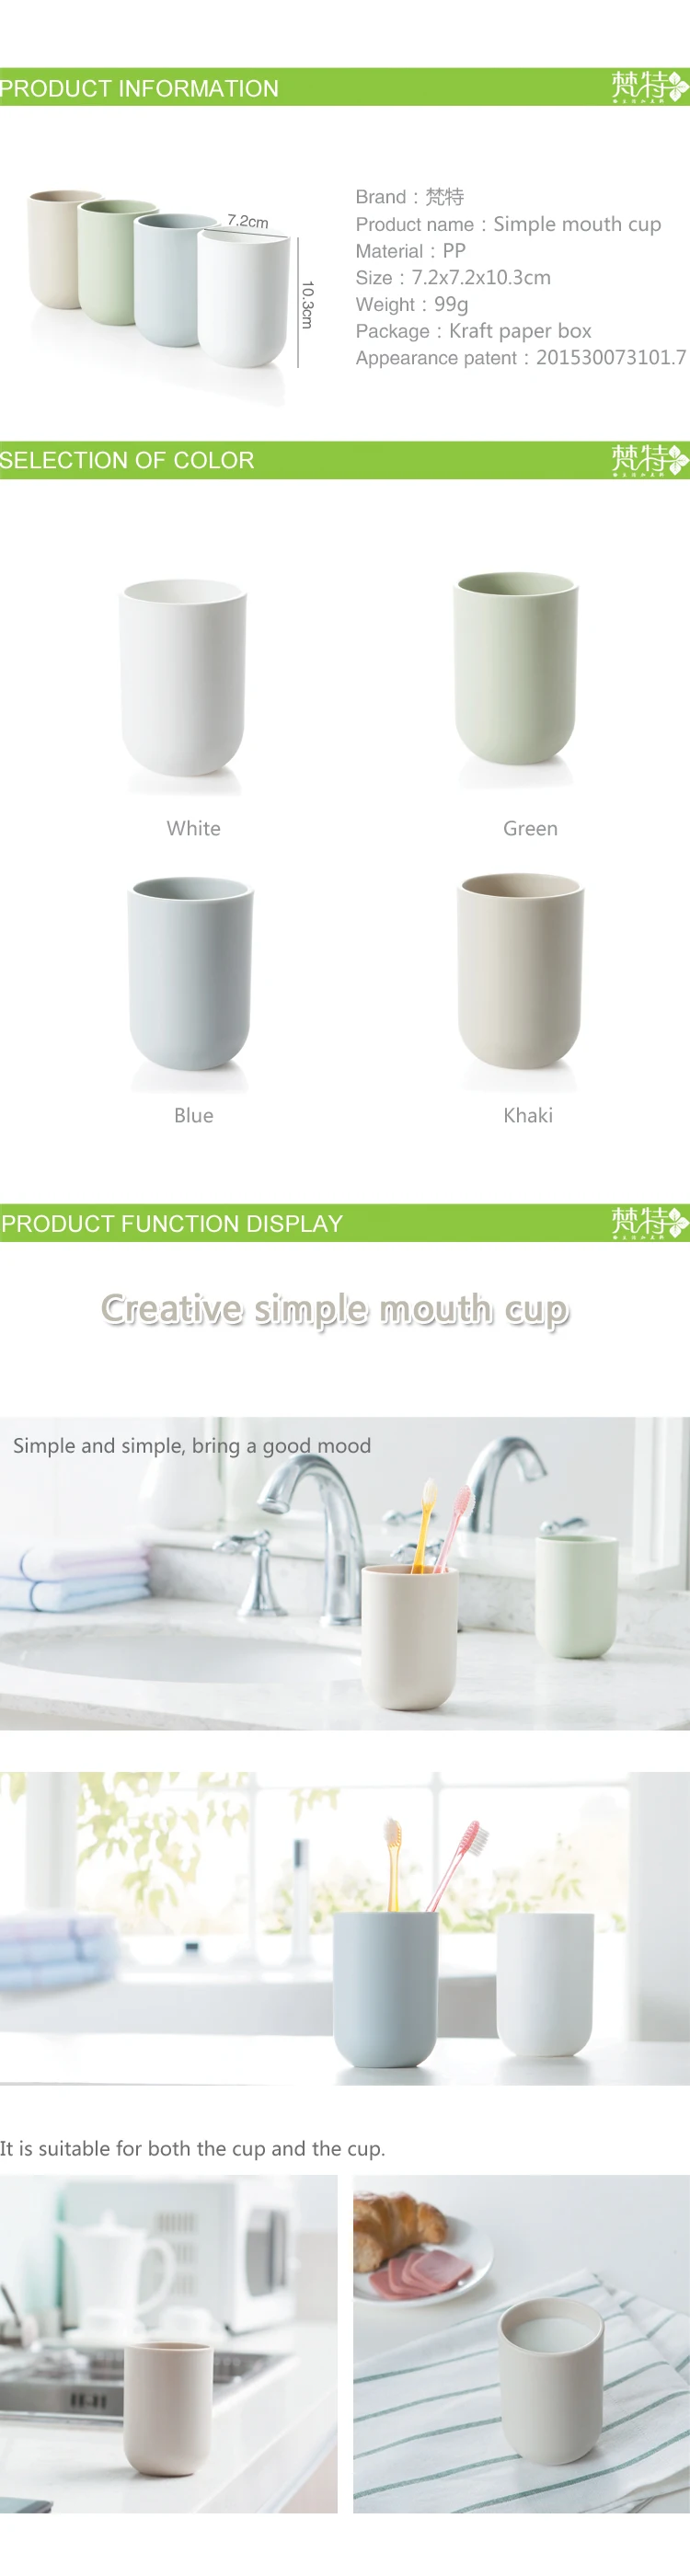 Bathroom Plastic Good Morning Cup Round Toothbrush Toothpaste Rack Cup Travel Washing Cup Bathroom Accessories